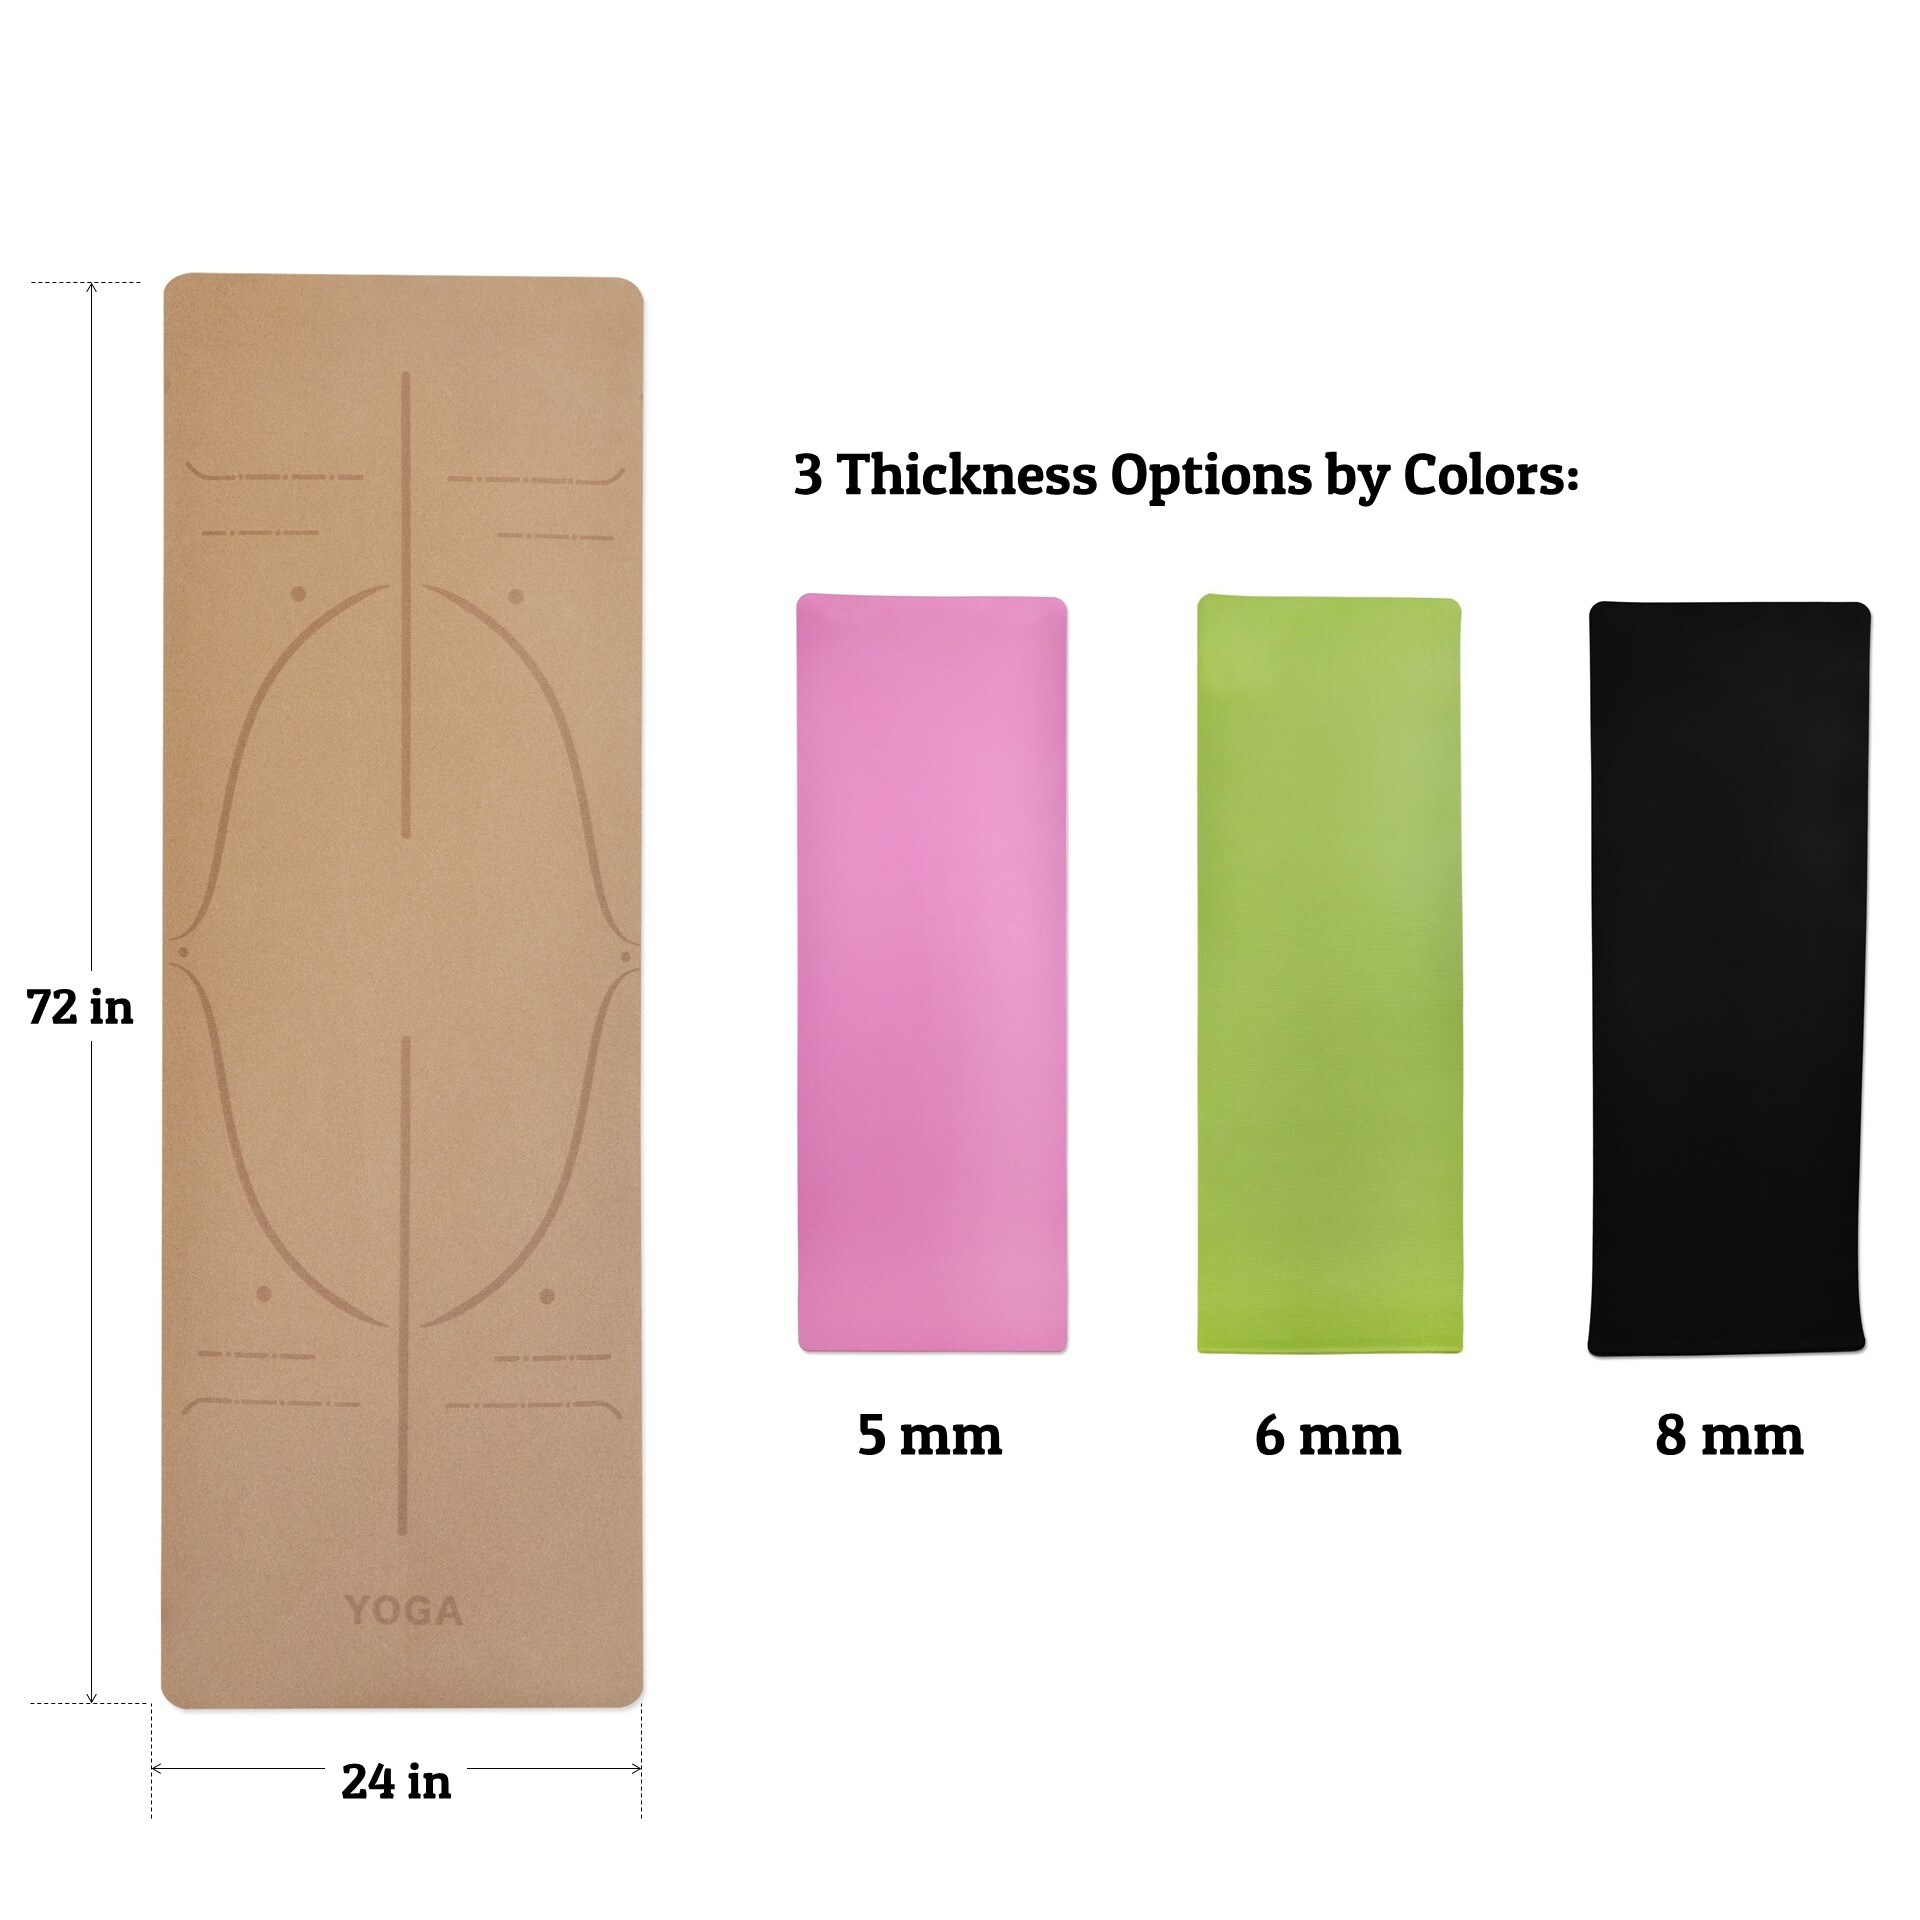 https://ak1.ostkcdn.com/images/products/is/images/direct/551f51f870313101bdf92a8c97a641ce458a405e/Natural-Cork-Rubber-Yoga-Mat-Non-Slip-for-Home-Gym-Yoga-Pilates-Workout-Exercise%2C-72X24-IN.jpg